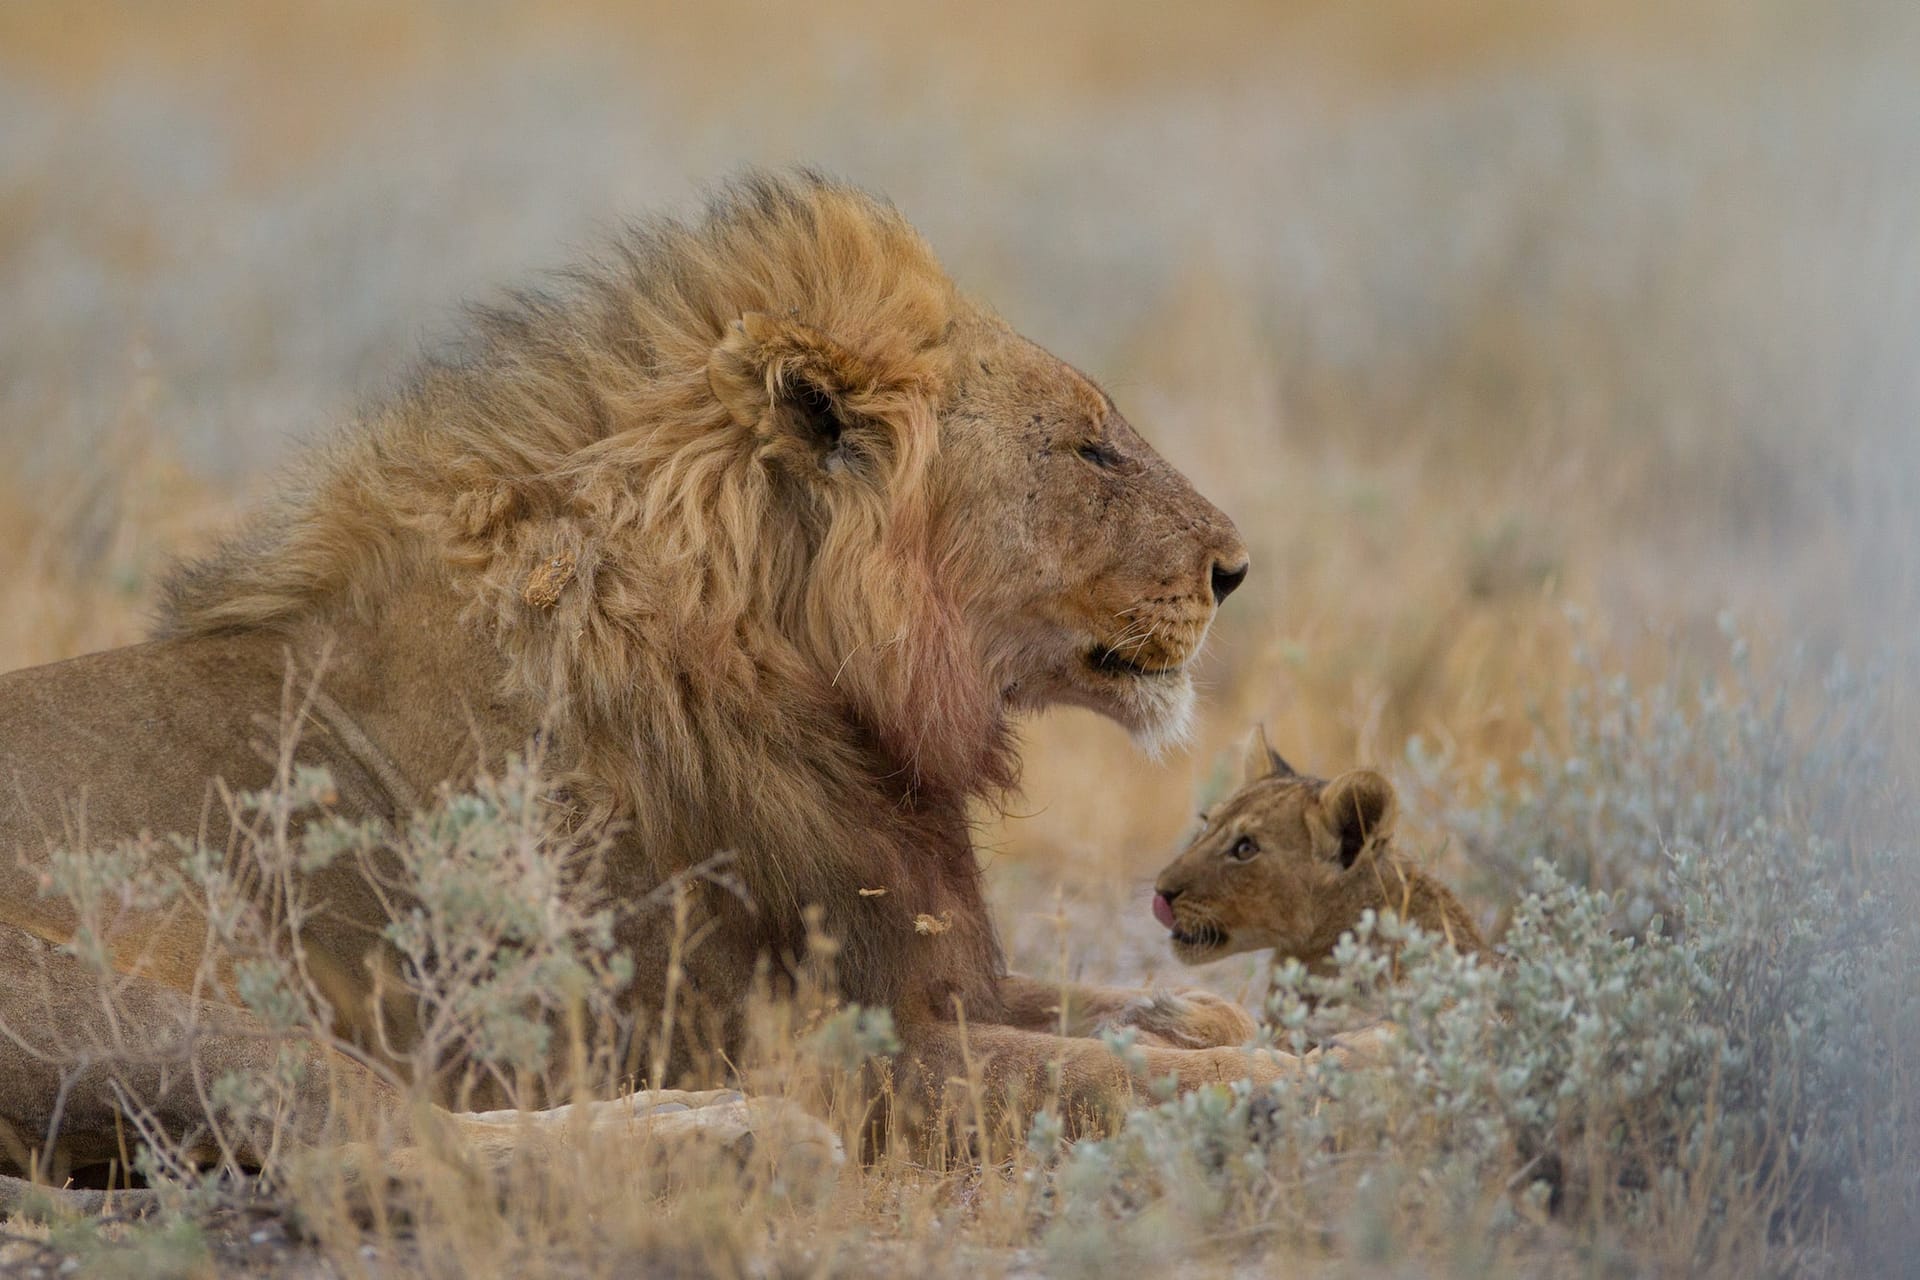 Magnificent lion and his baby resting among the plants in the middle of a field